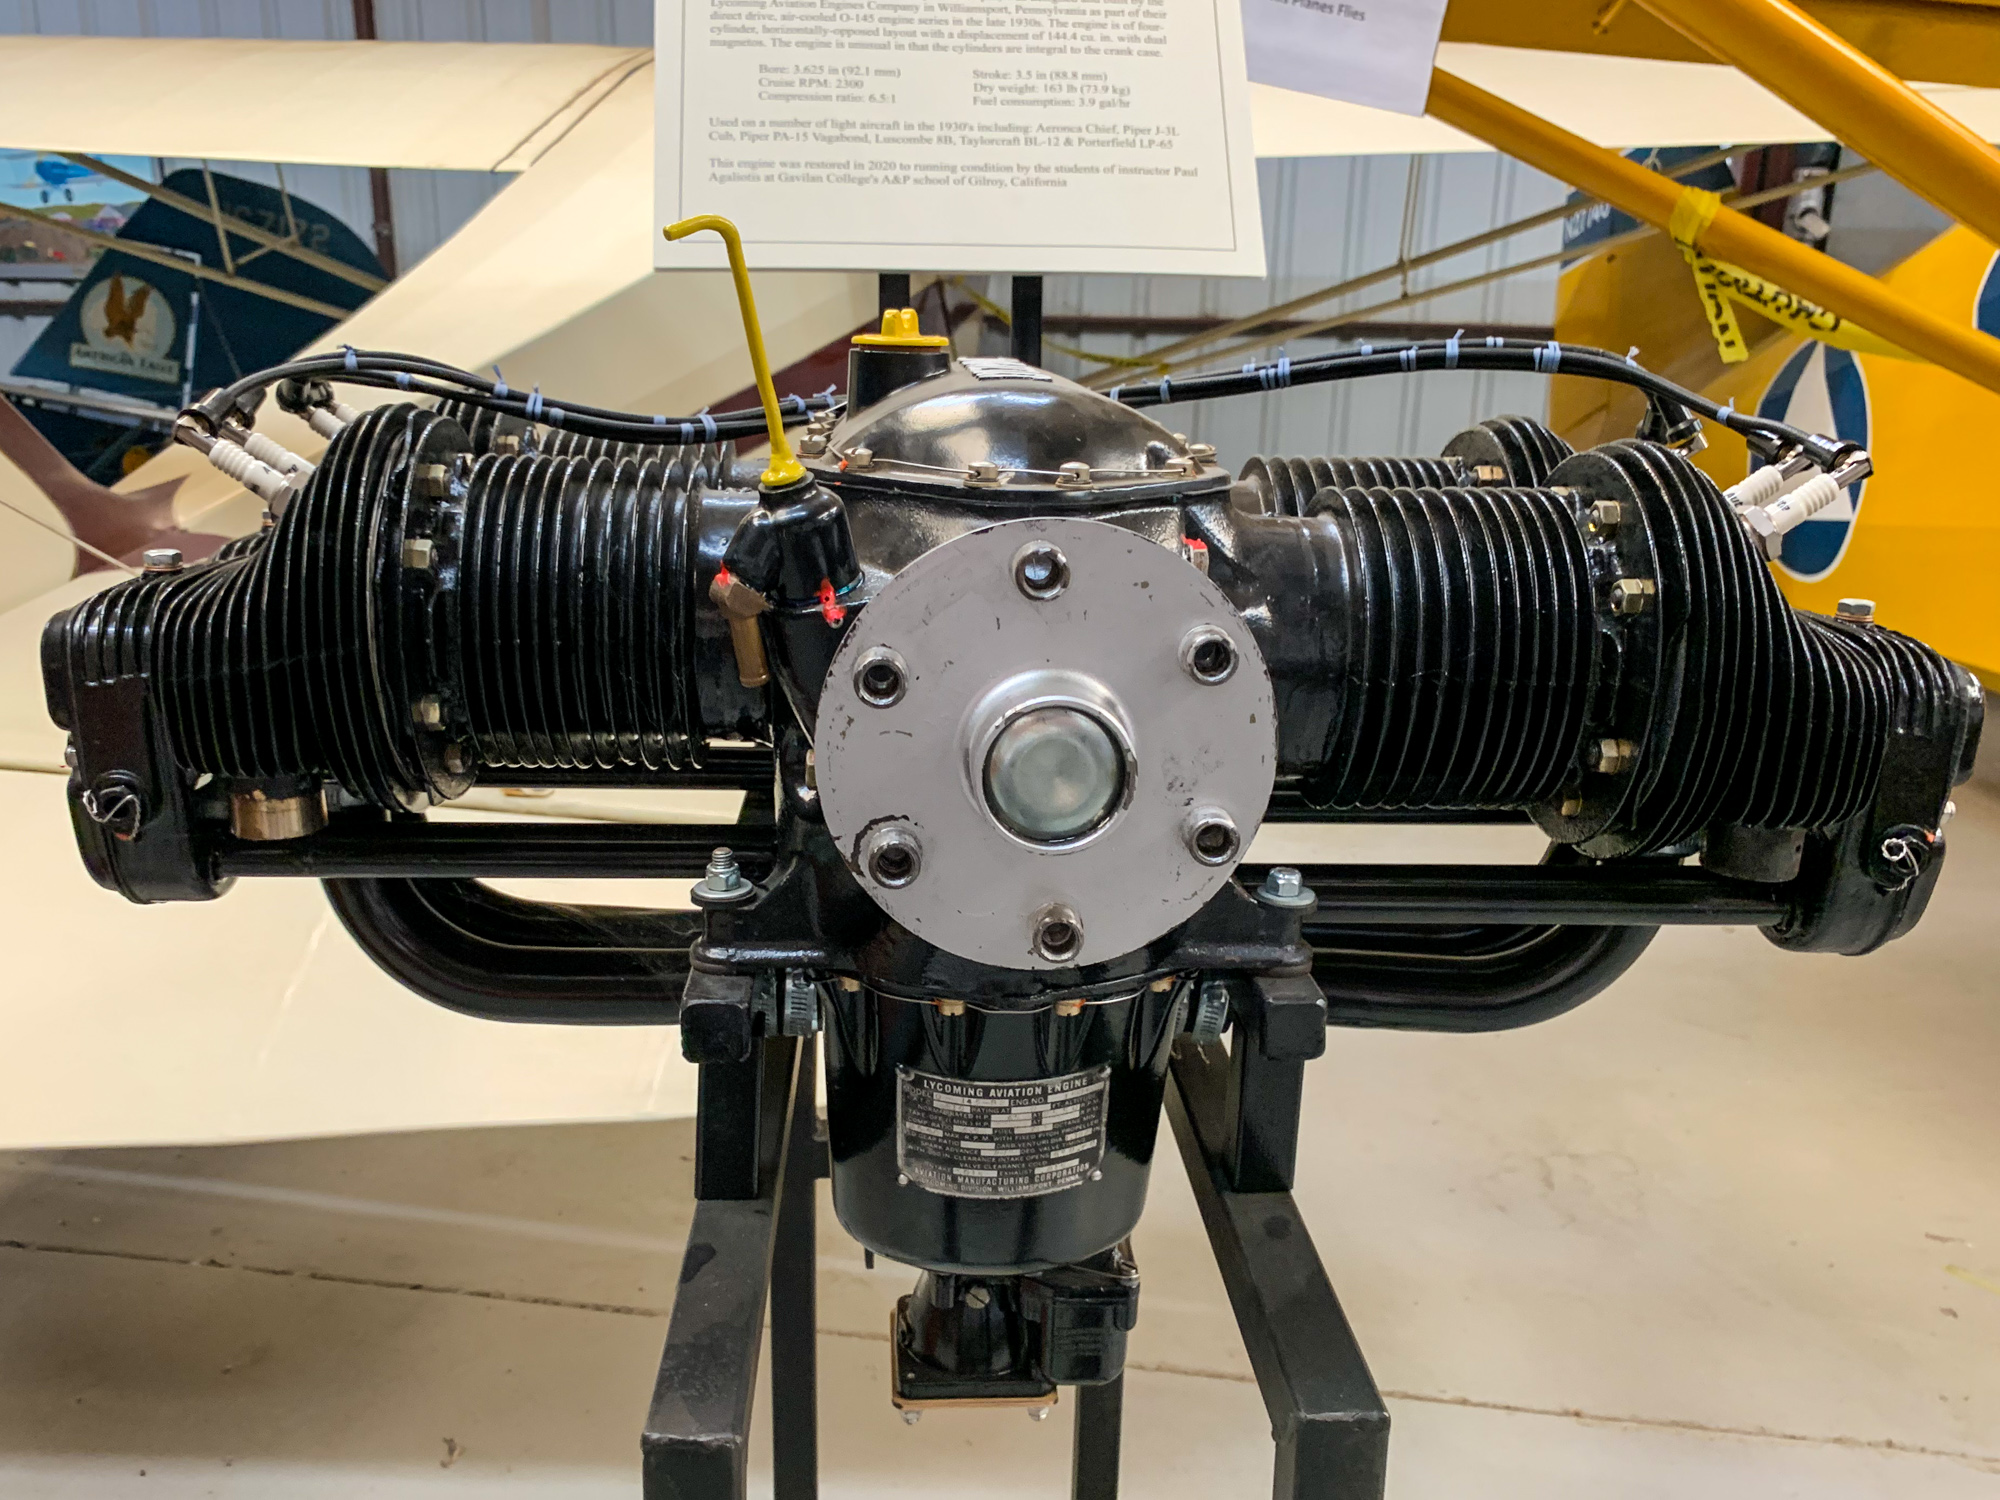 Lycoming Engines, Piston Aircraft